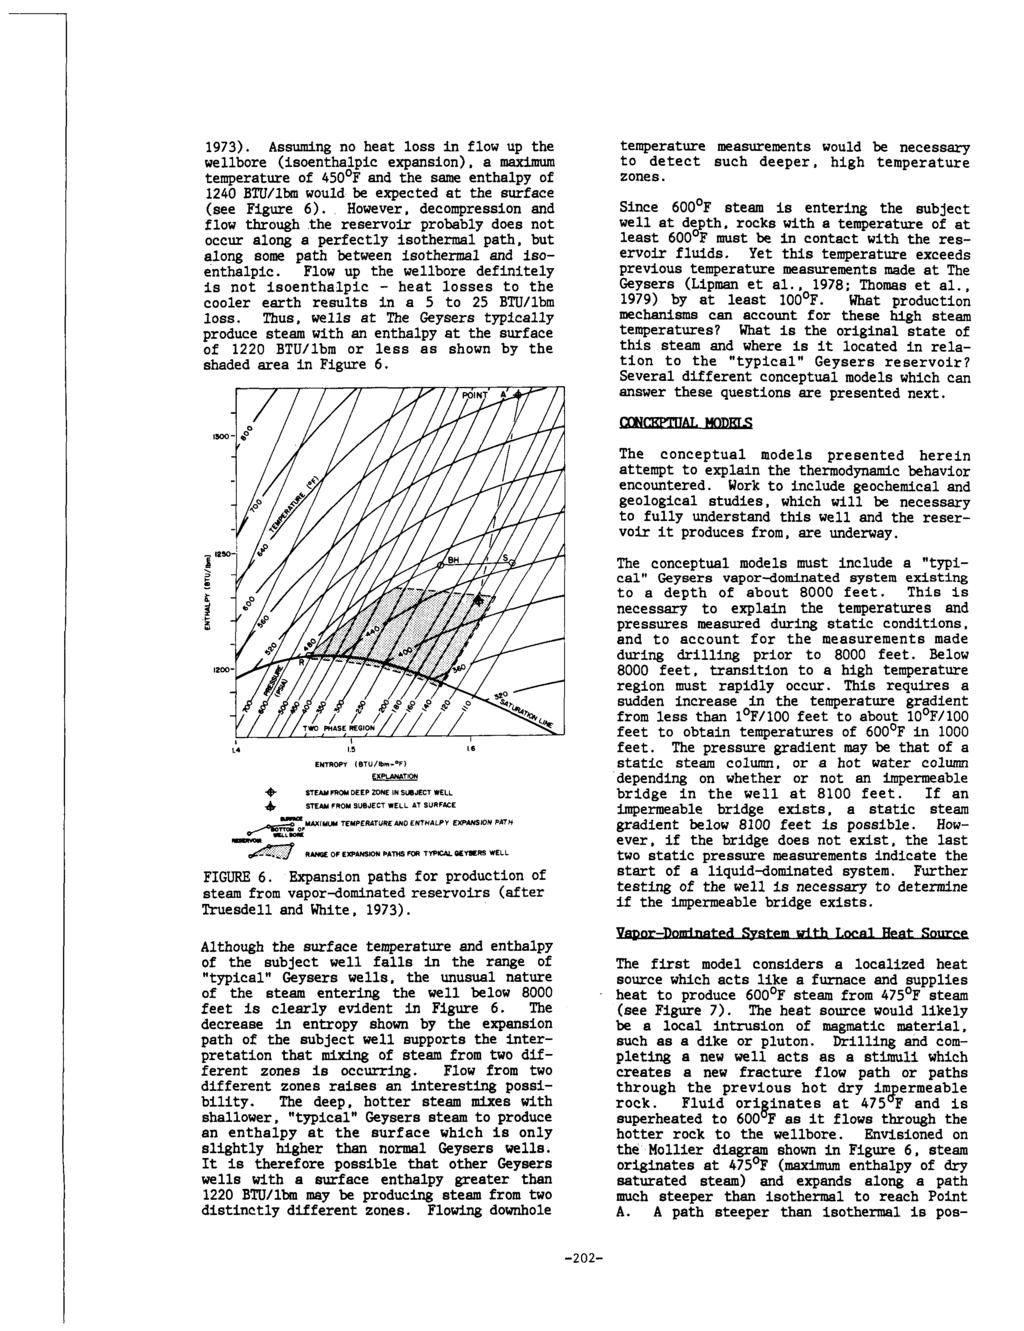 1973). Assuming no heat loss in flow up the wellbore (isoenthalpic expansion), a maximum temperature of 450 F and the same enthalpy of 1240 BTU/lh would be expected at the surface (see Figure 6).